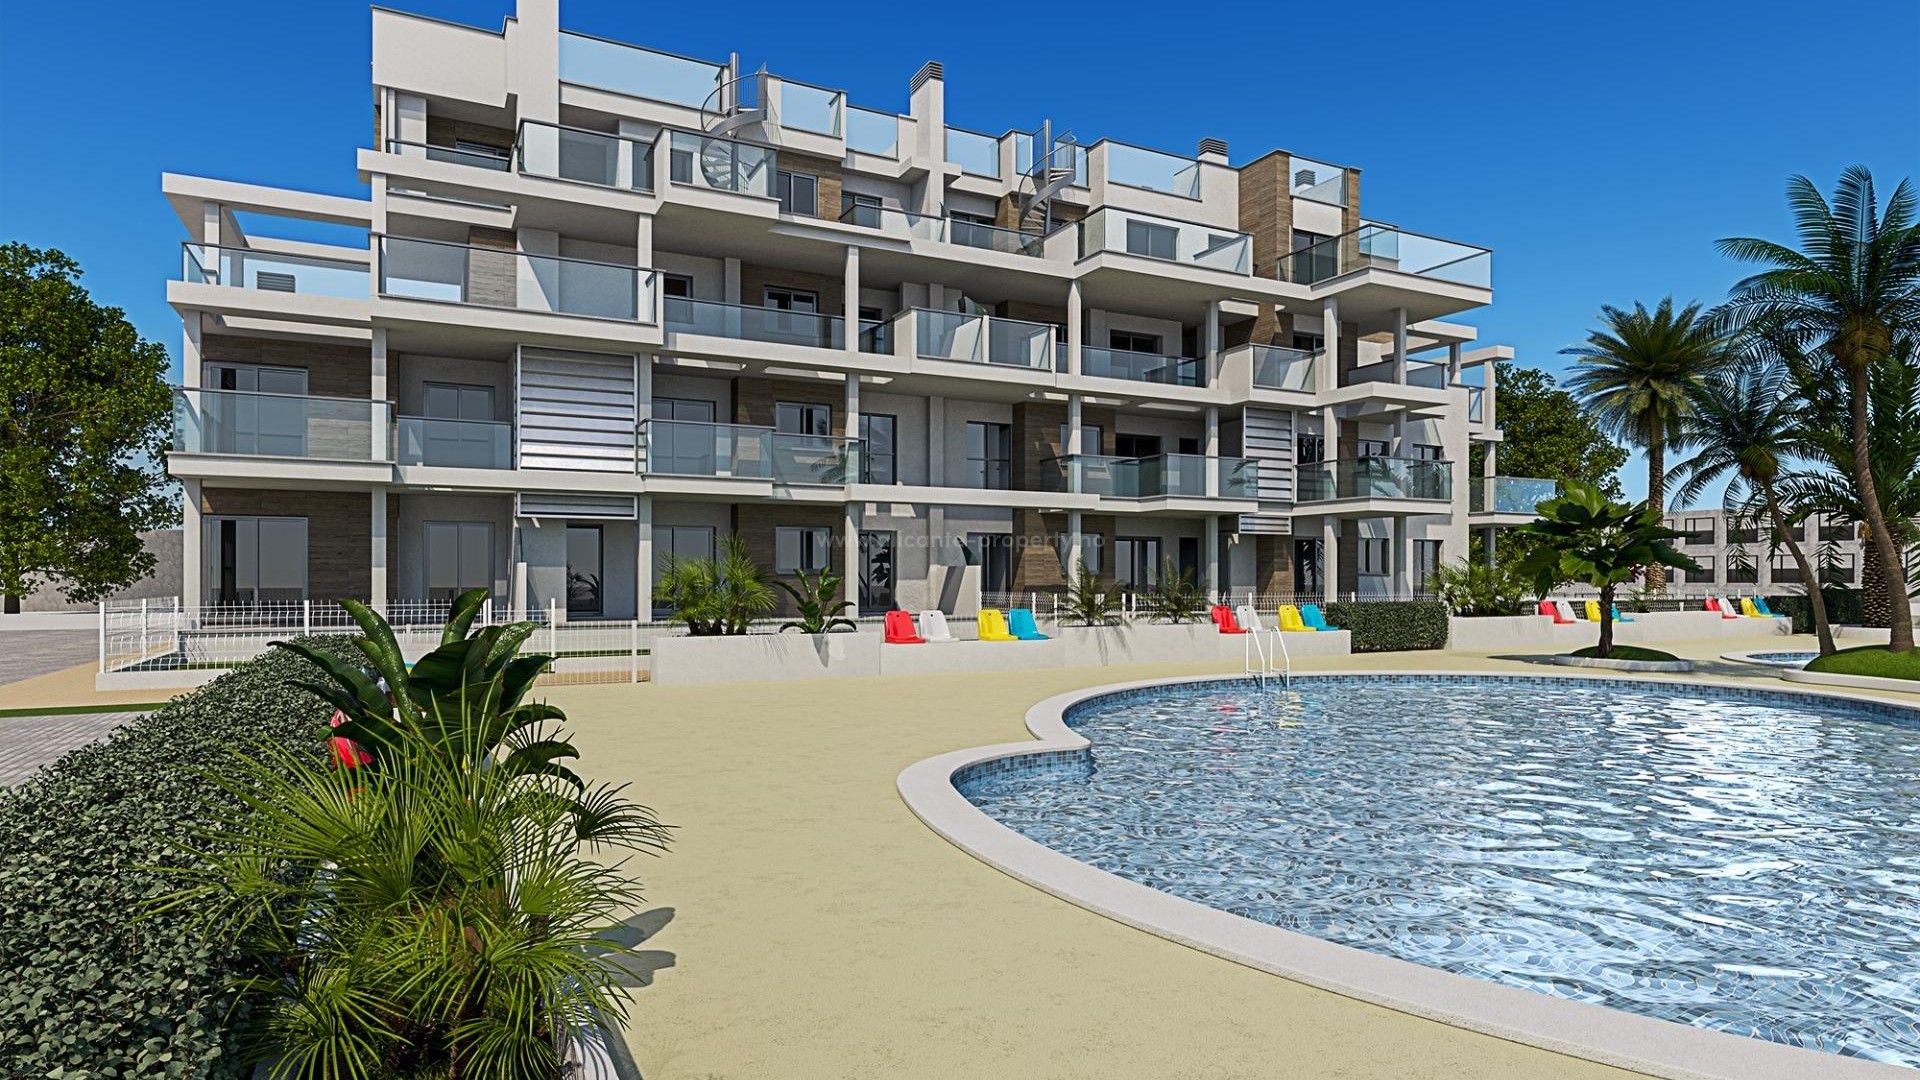 New homes in Denia, 2/3 bedrooms, 2 bathrooms, communal swimming pool, private garden or solarium, parking, 100 meters from the beach, 2 km from Denia town.